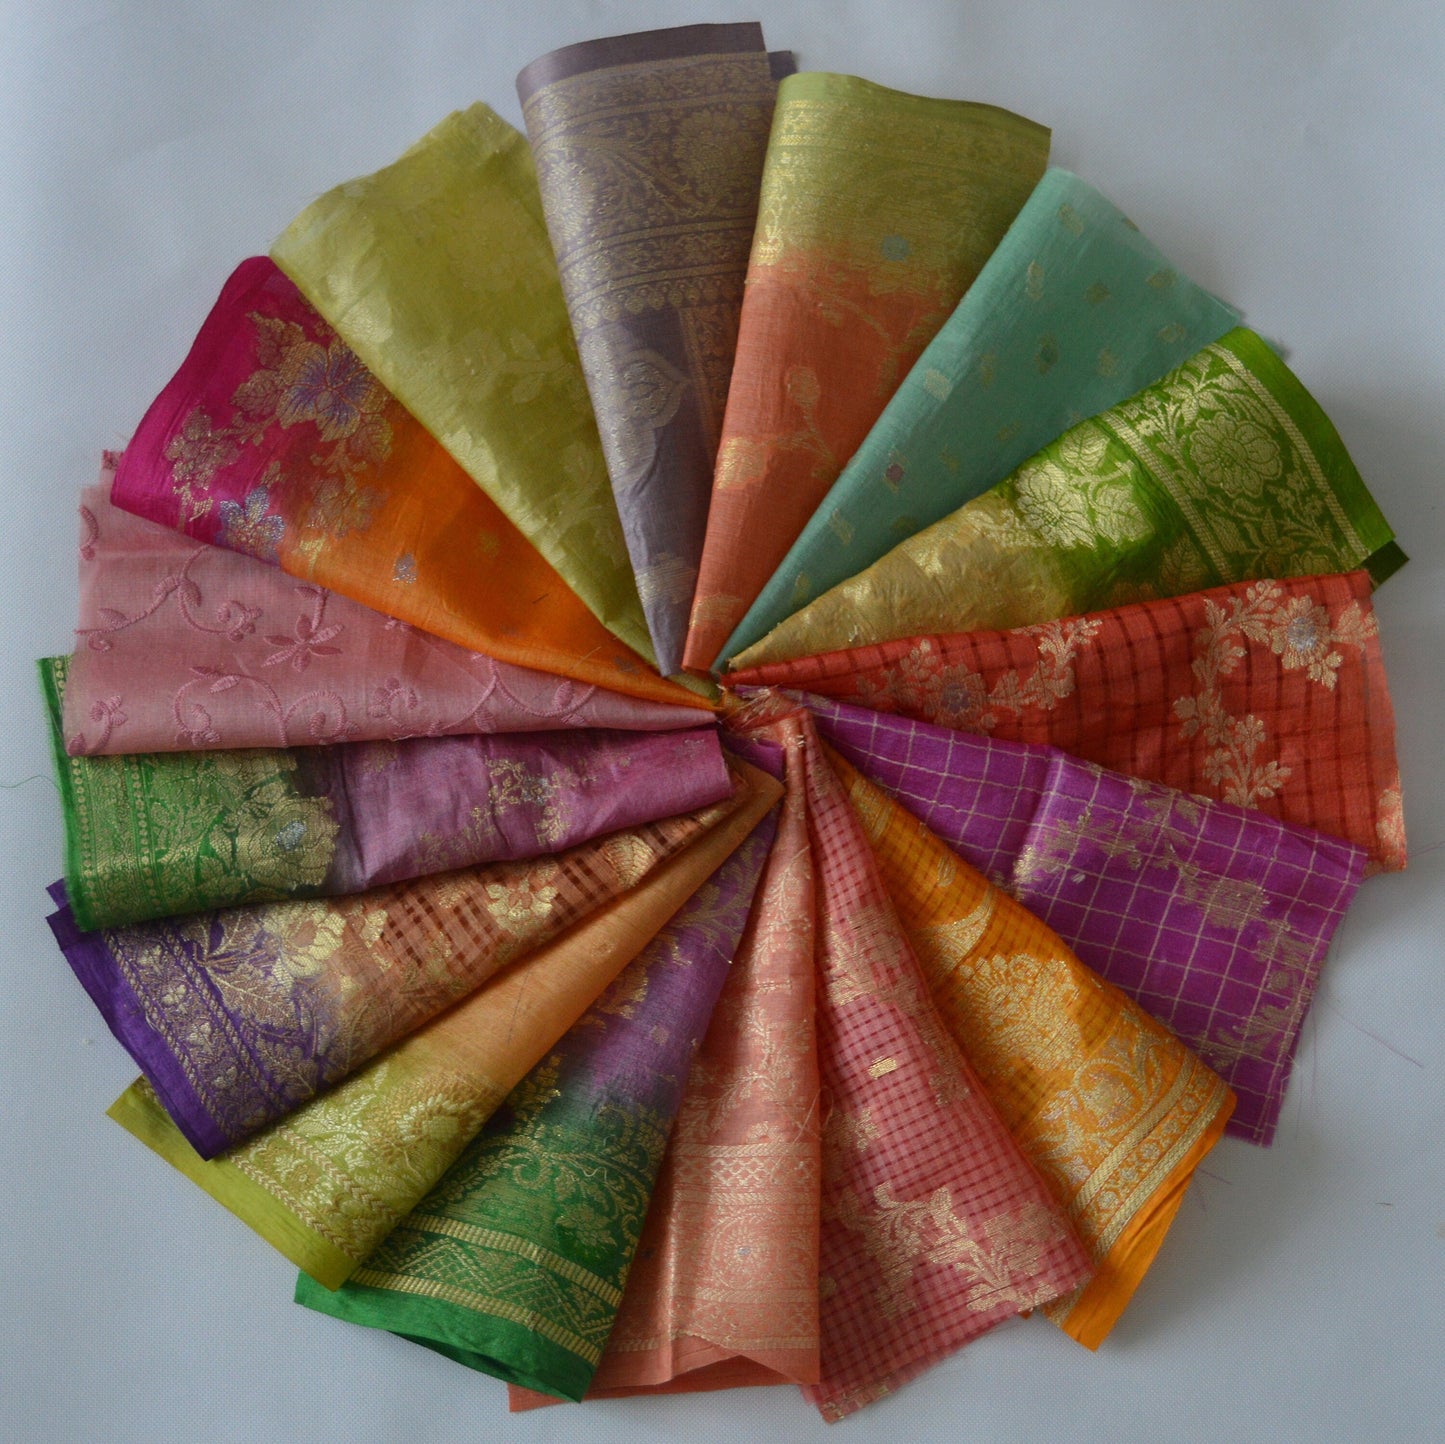 5 Inch x 16 Pieces Mixed Colour Recycled Vintage Sari Scraps Remnant Brocade Craft Fabric Collage Mixed Media Textile Art Junk Journals